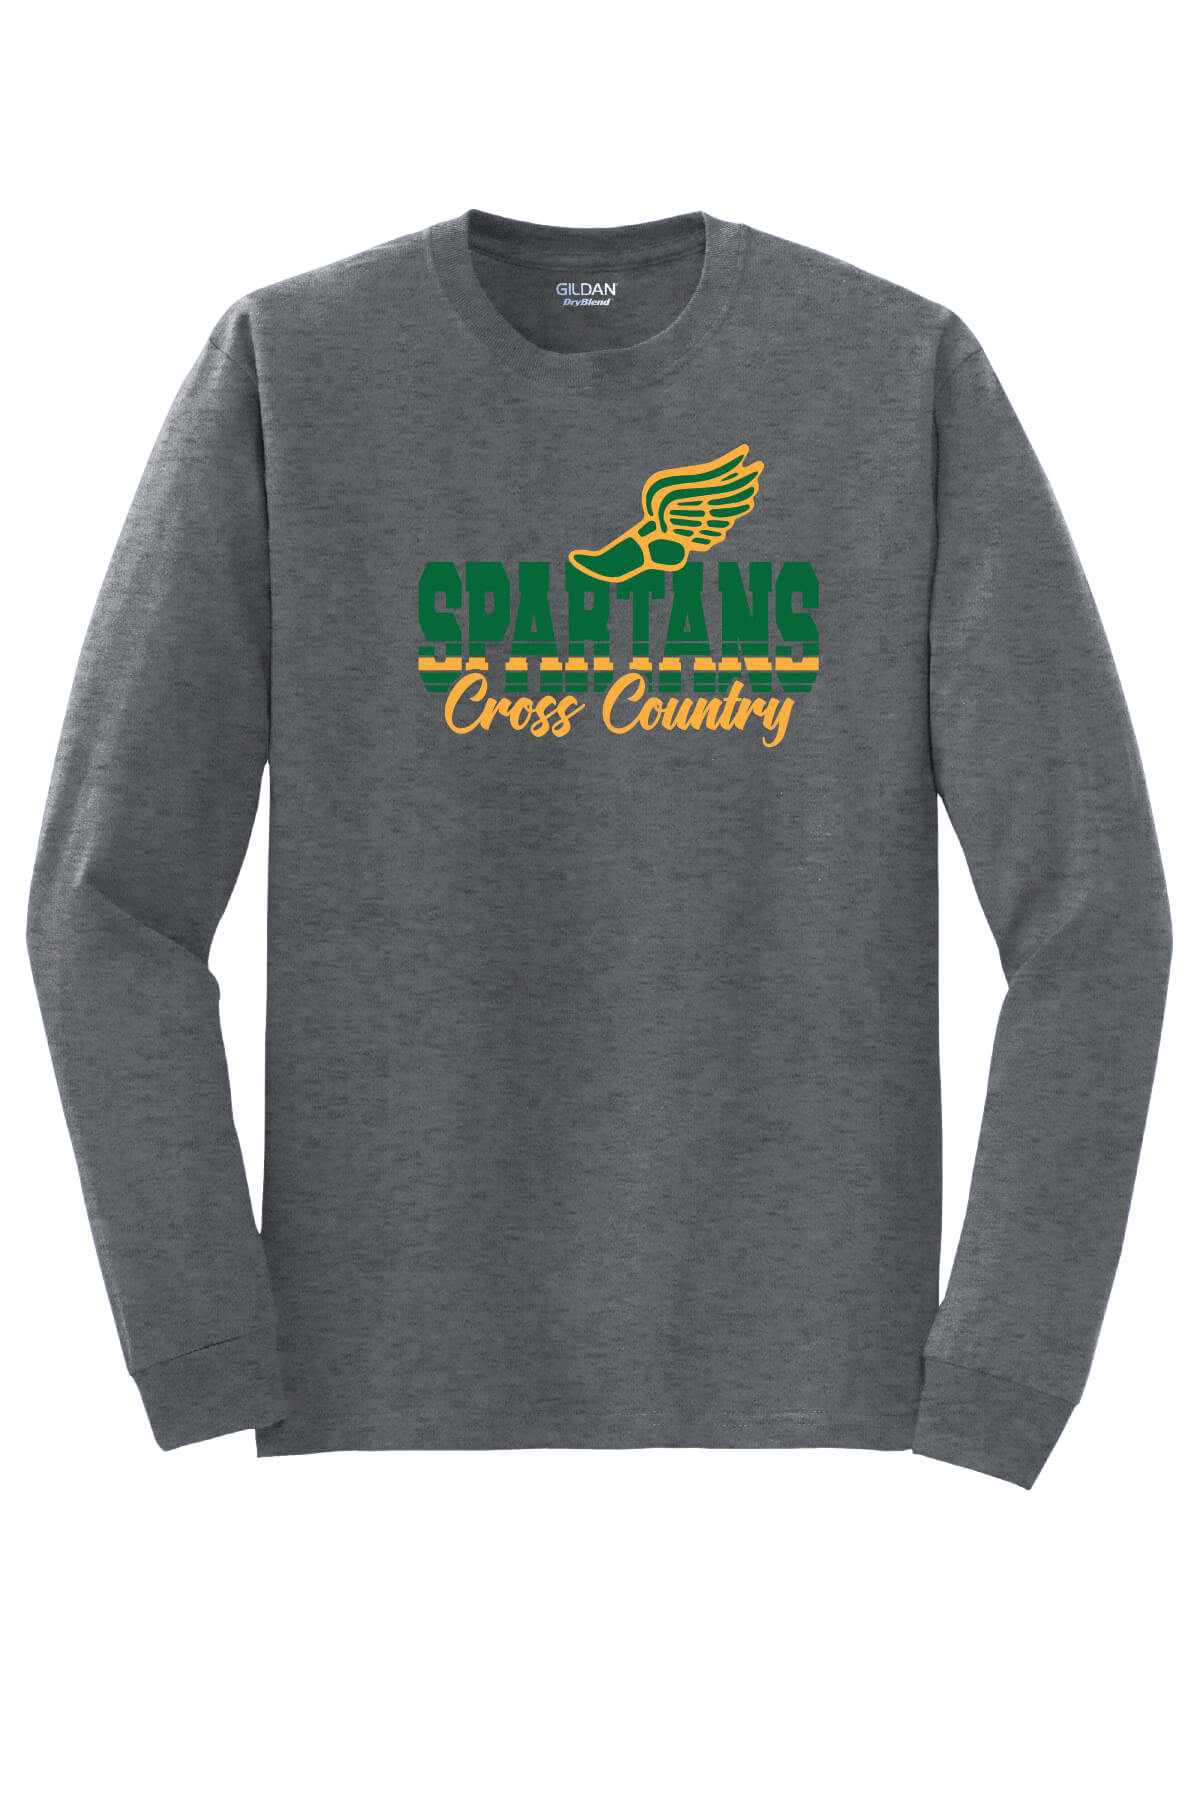 Spartans Cross Country Long Sleeve T-Shirt gray